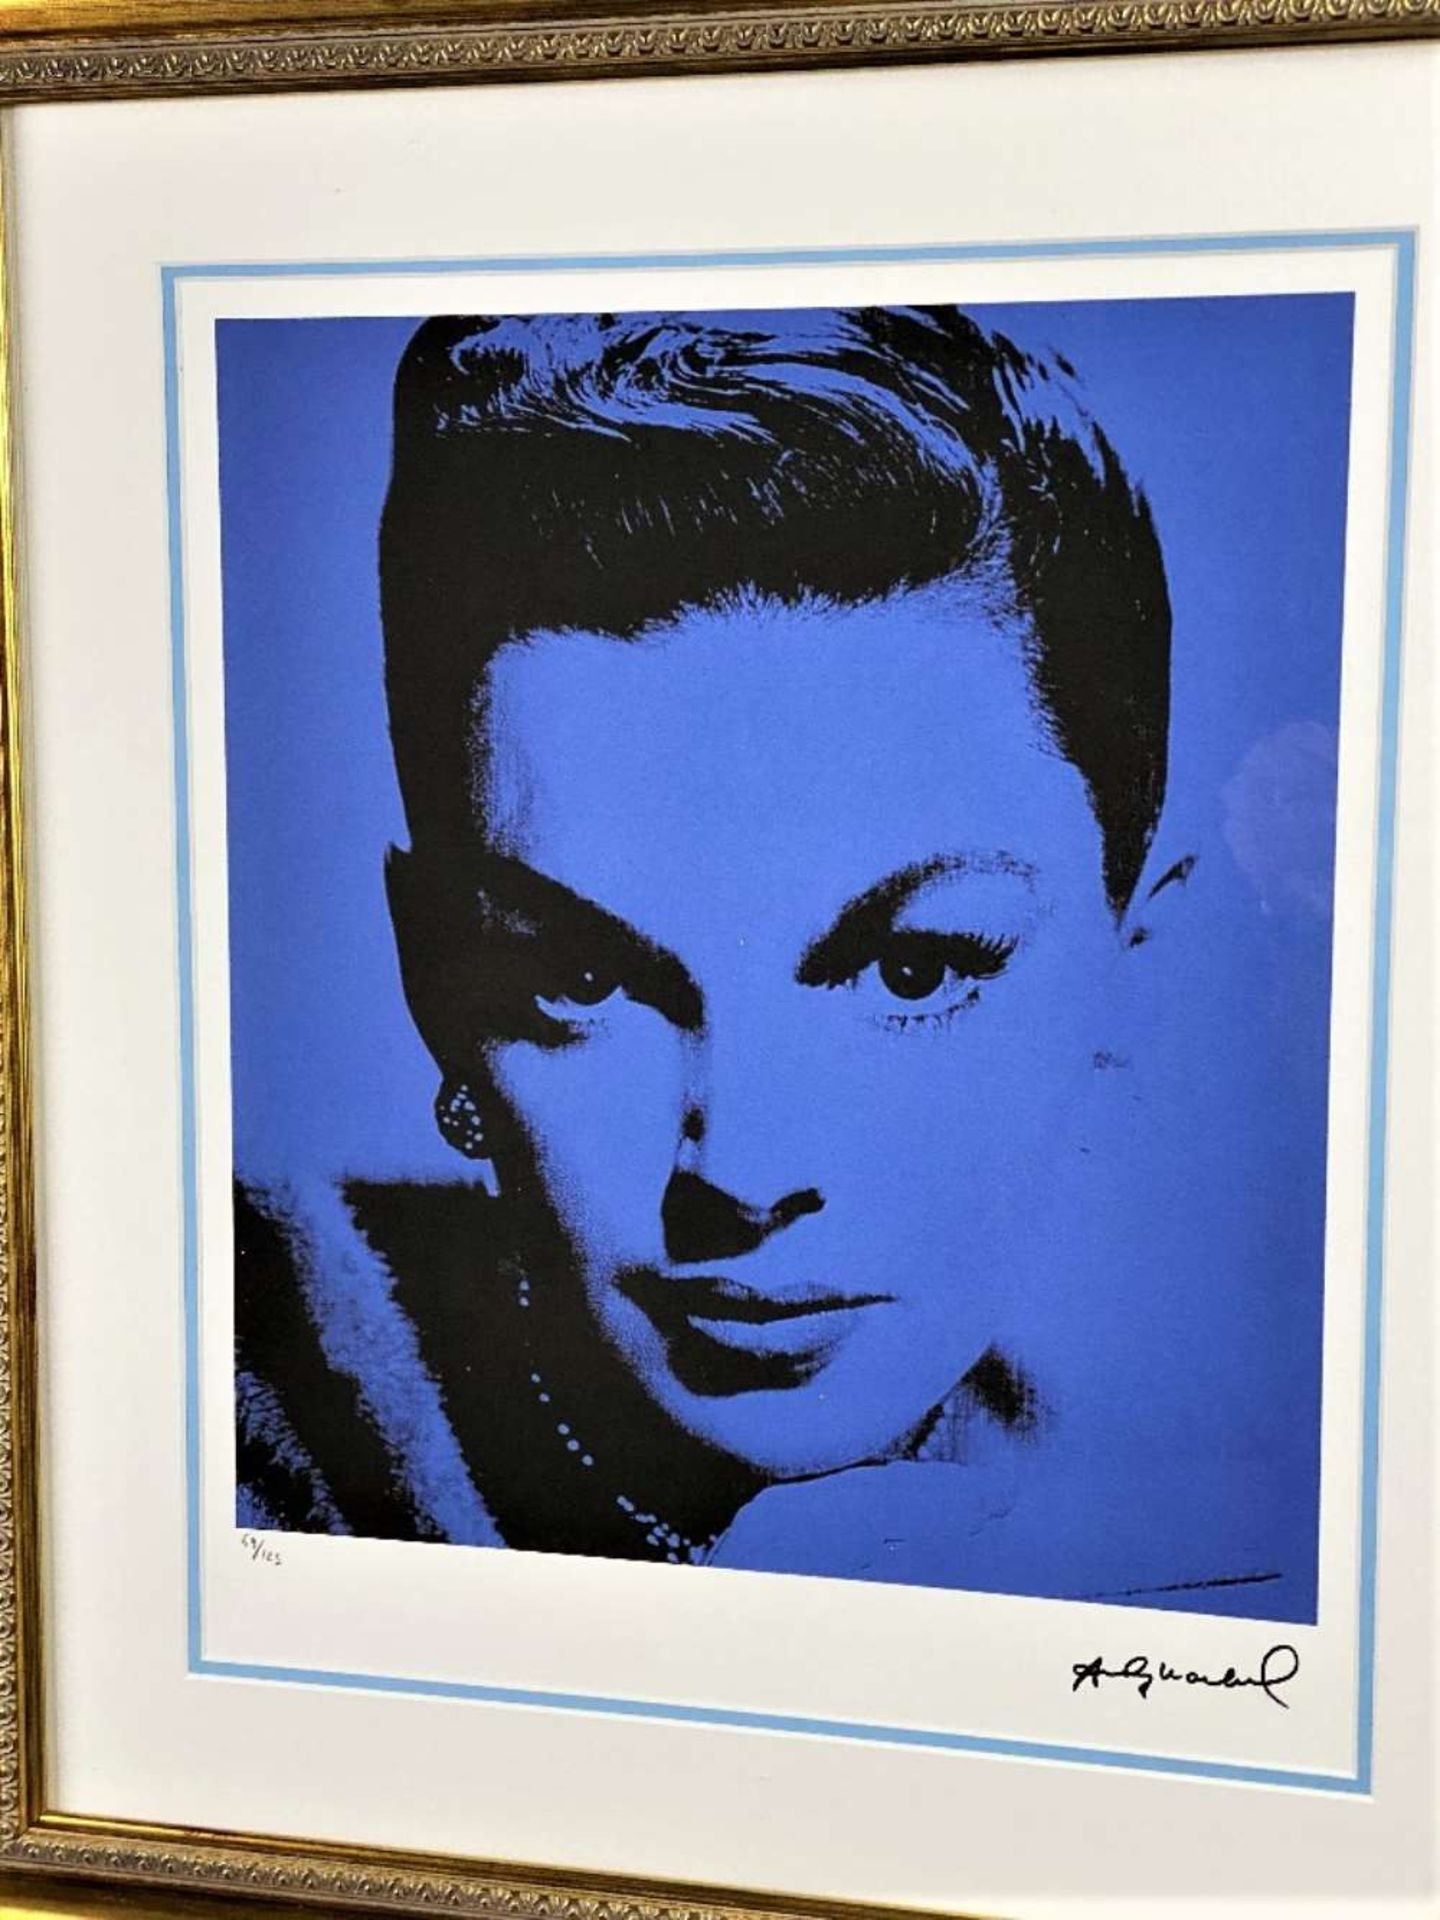 Andy Warhol (1928-1987) “Judy Garland” Numbered Ltd Edition of 125 Lithograph #69, Ornate Framed. - Image 2 of 6